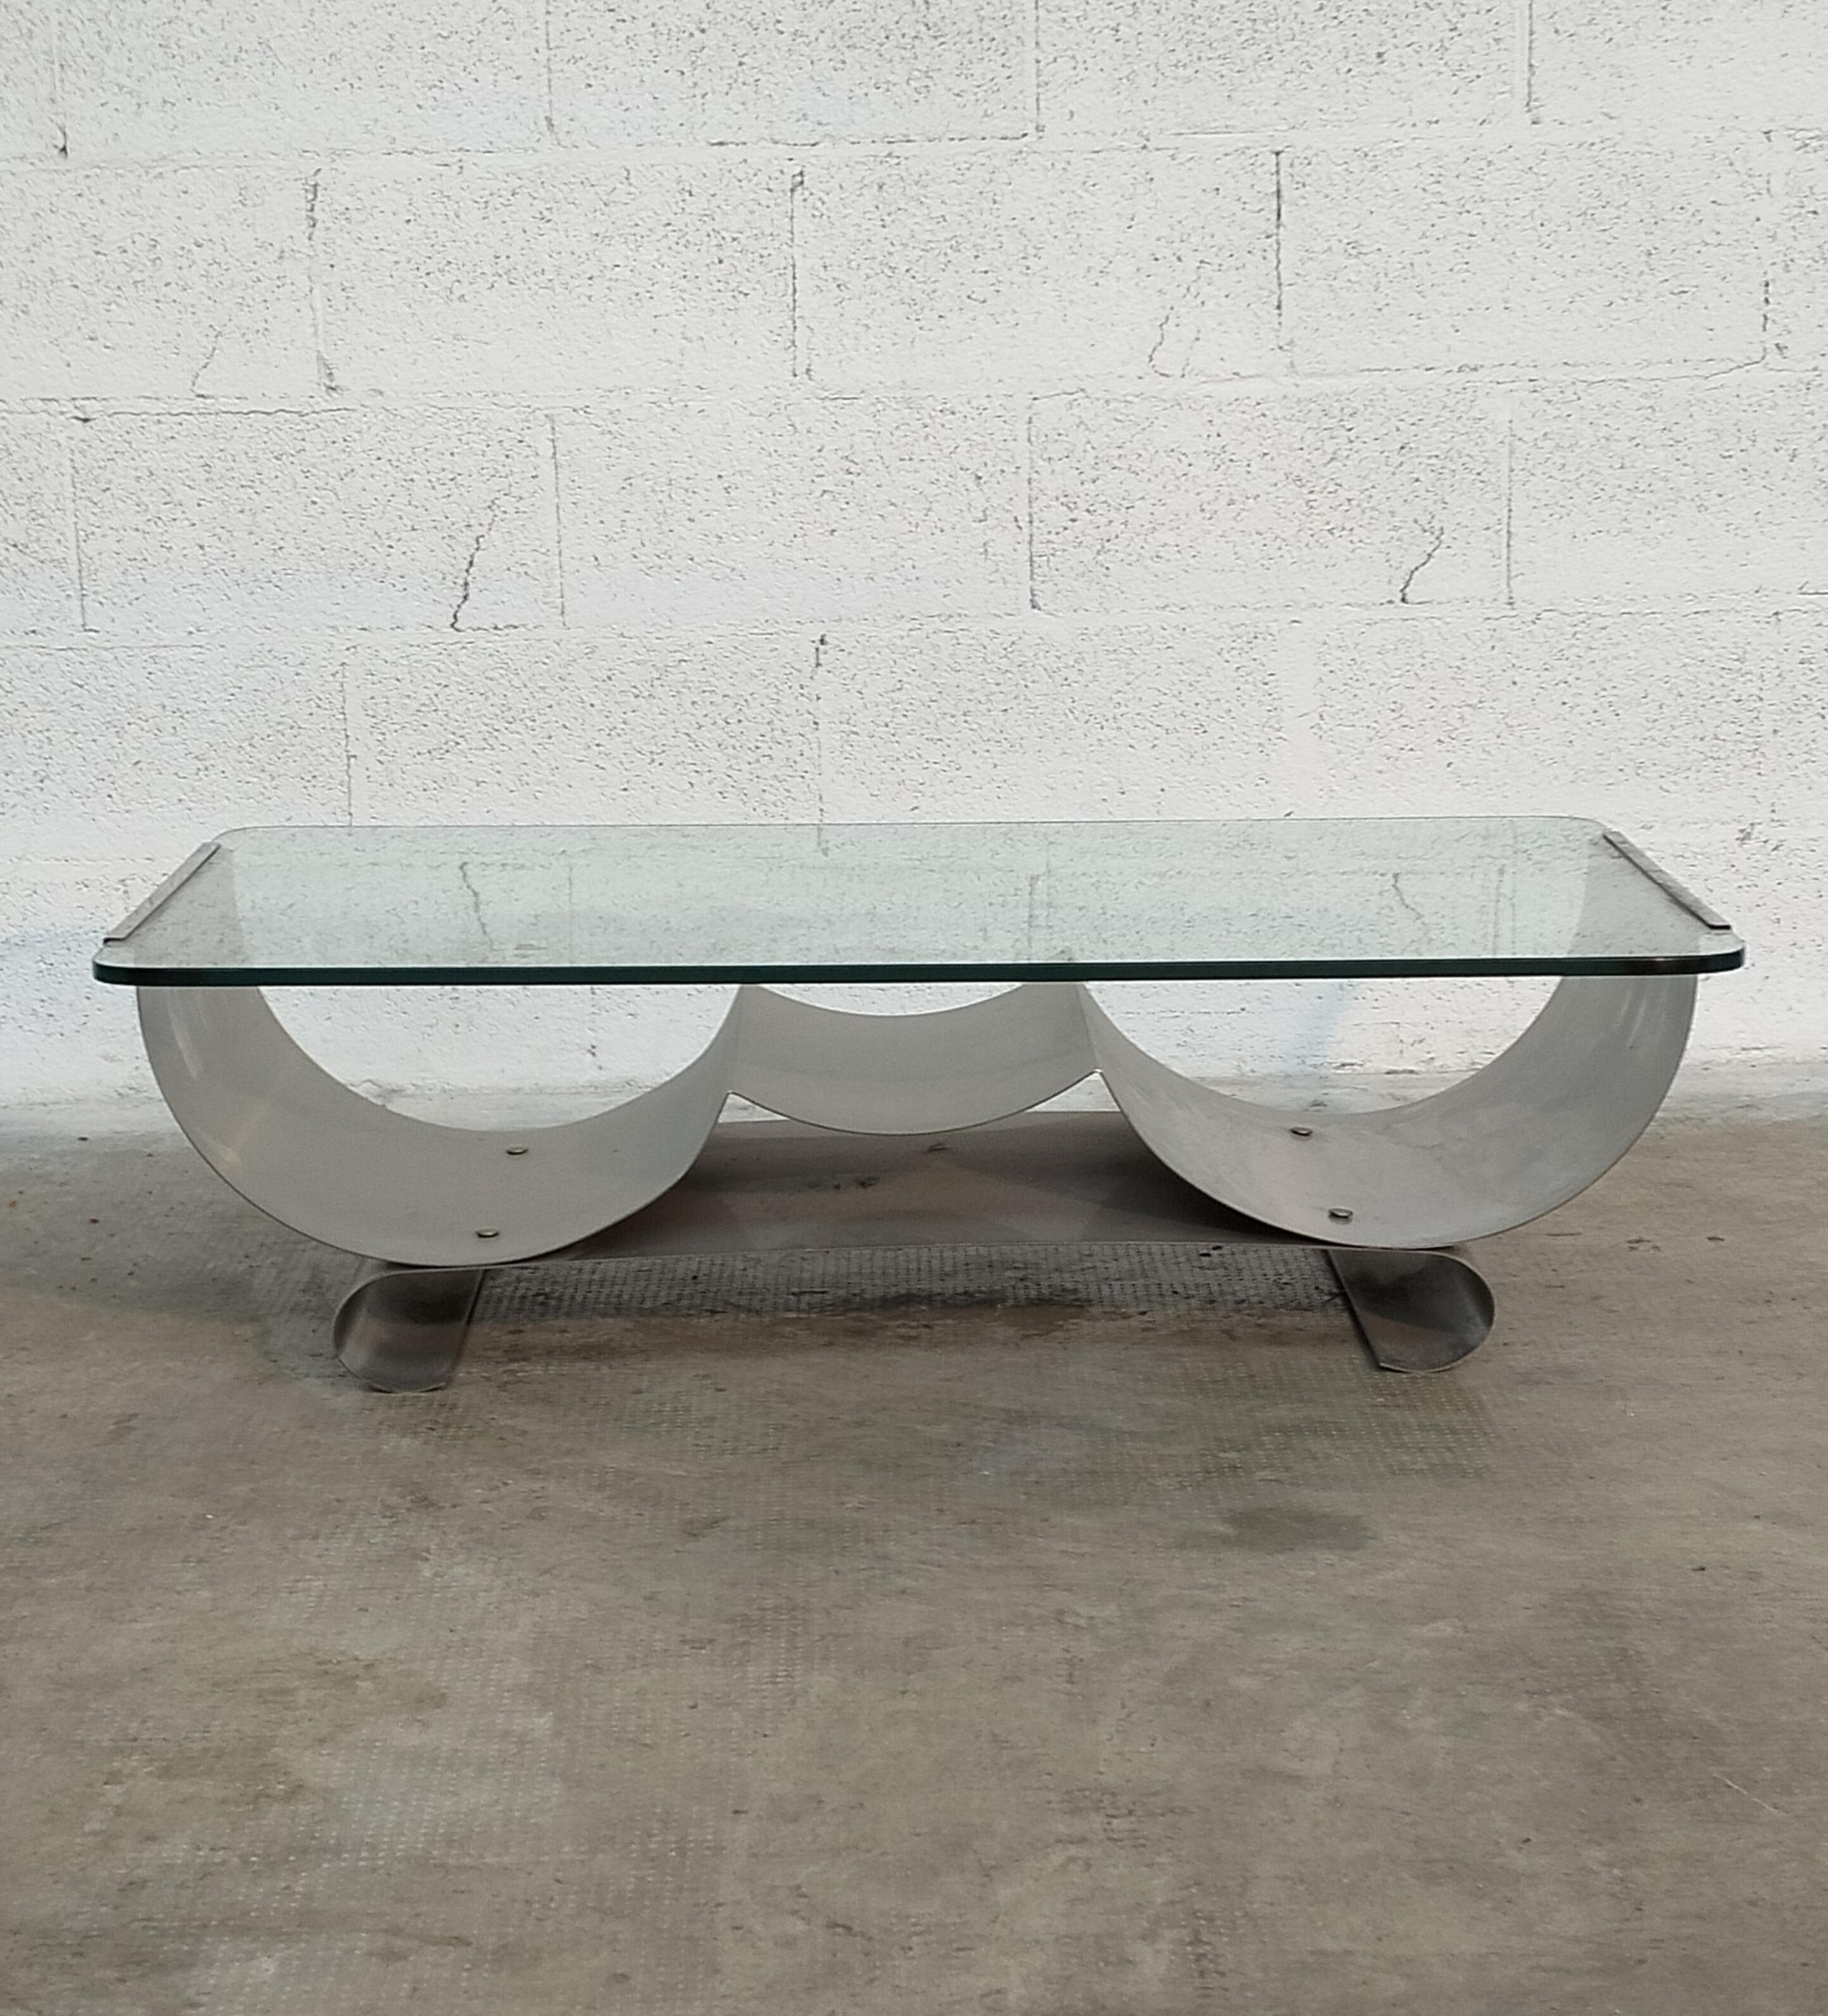 Stainless Steel and Glass Coffee Table by Francois Monnet for Kappa 70s For Sale 4